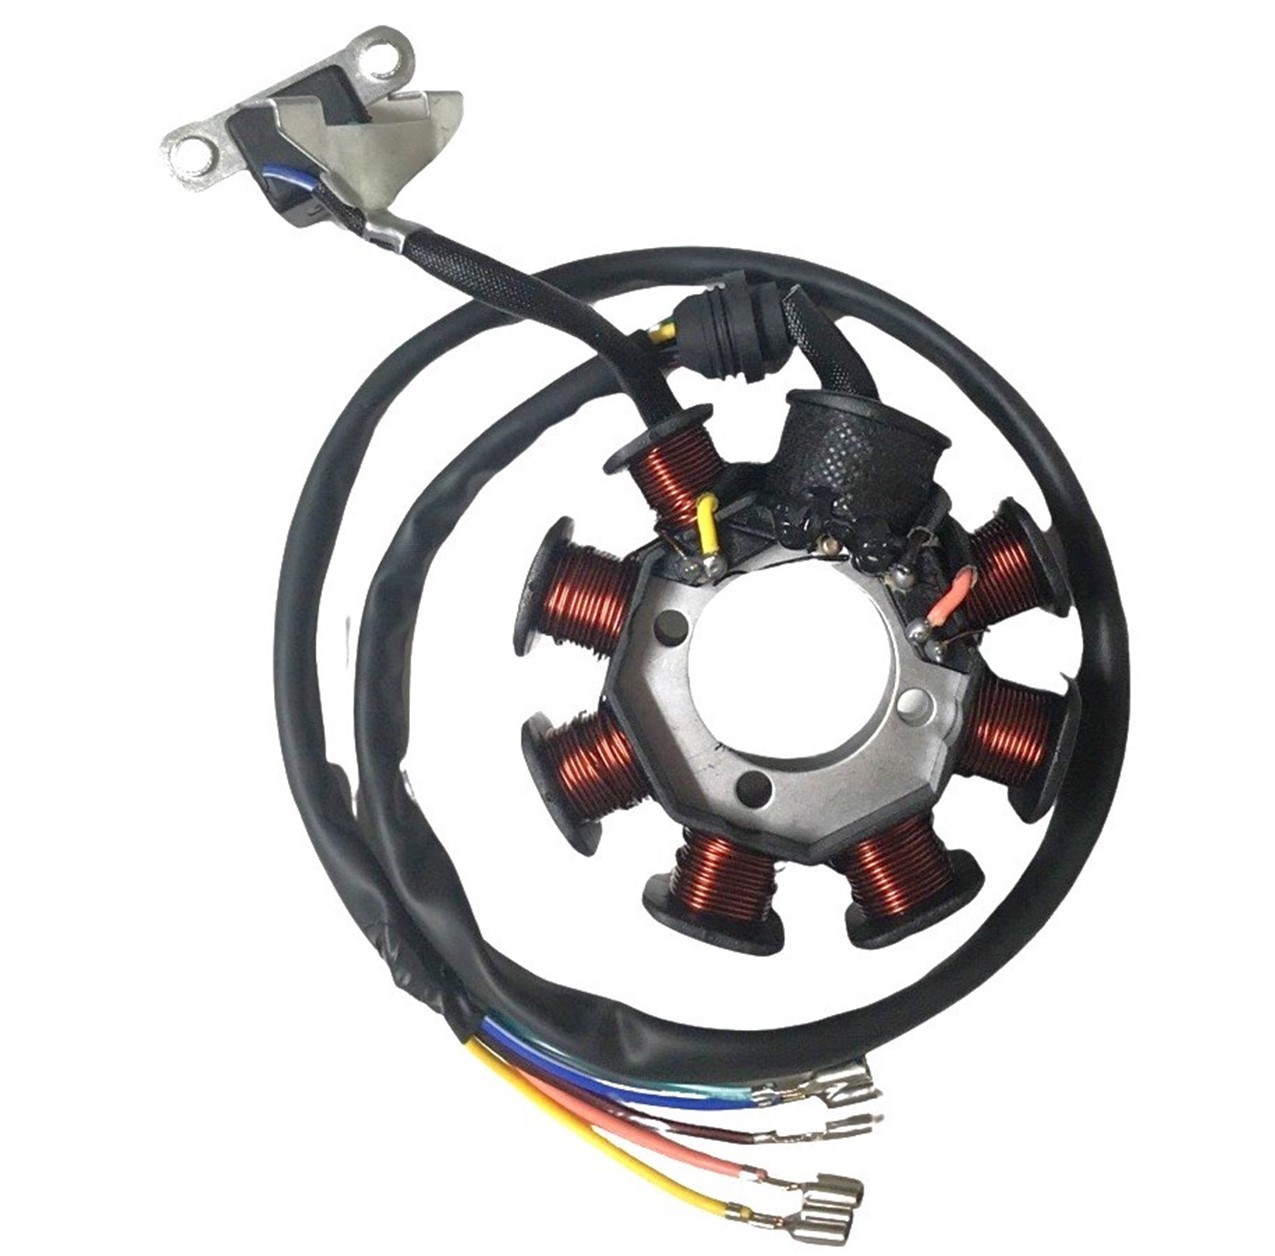 Stator 250cc Fits CG125 & CG150 + others 8 Coil 5 Wires (includes 6 pin connector) OD=88 ID=32 H=28 Bolts c/c=28 - Click Image to Close